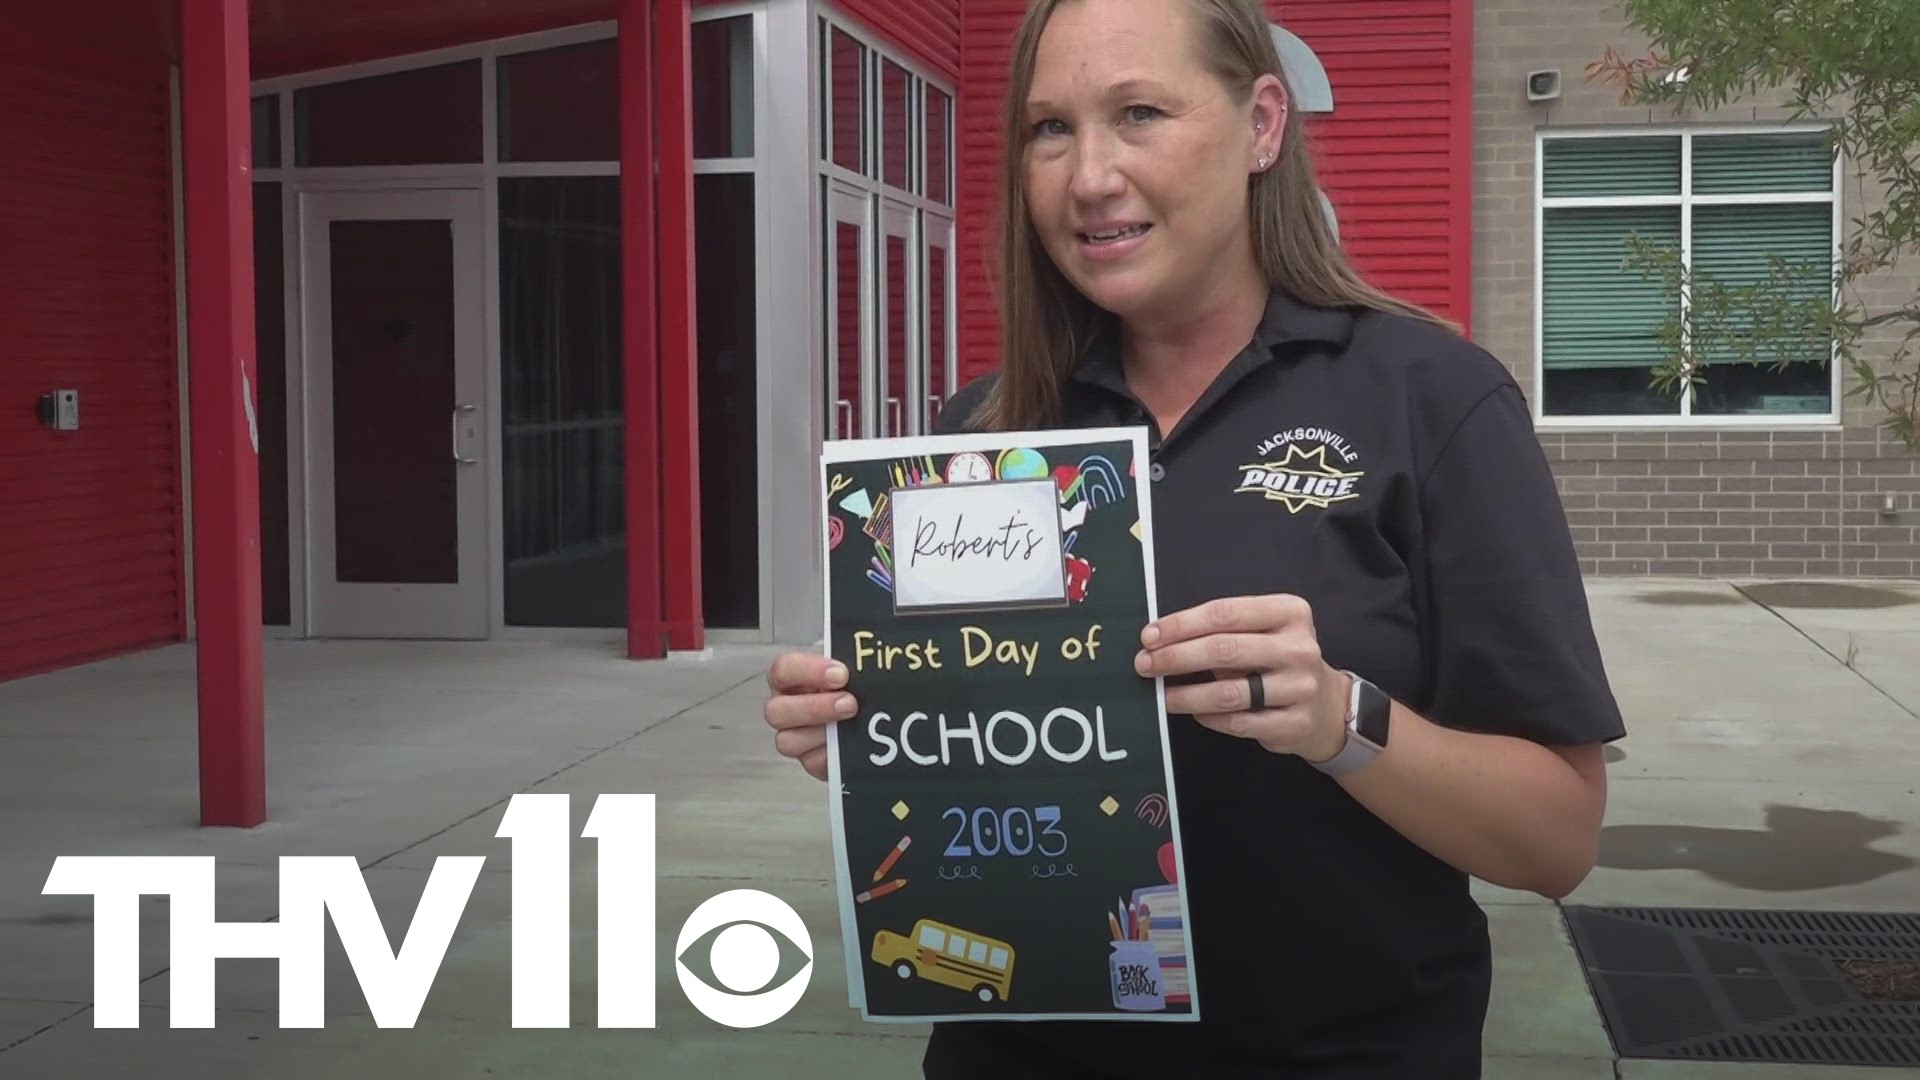 Police departments across Arkansas are sharing what parents need to know to help safely prepare them for the first day of school.